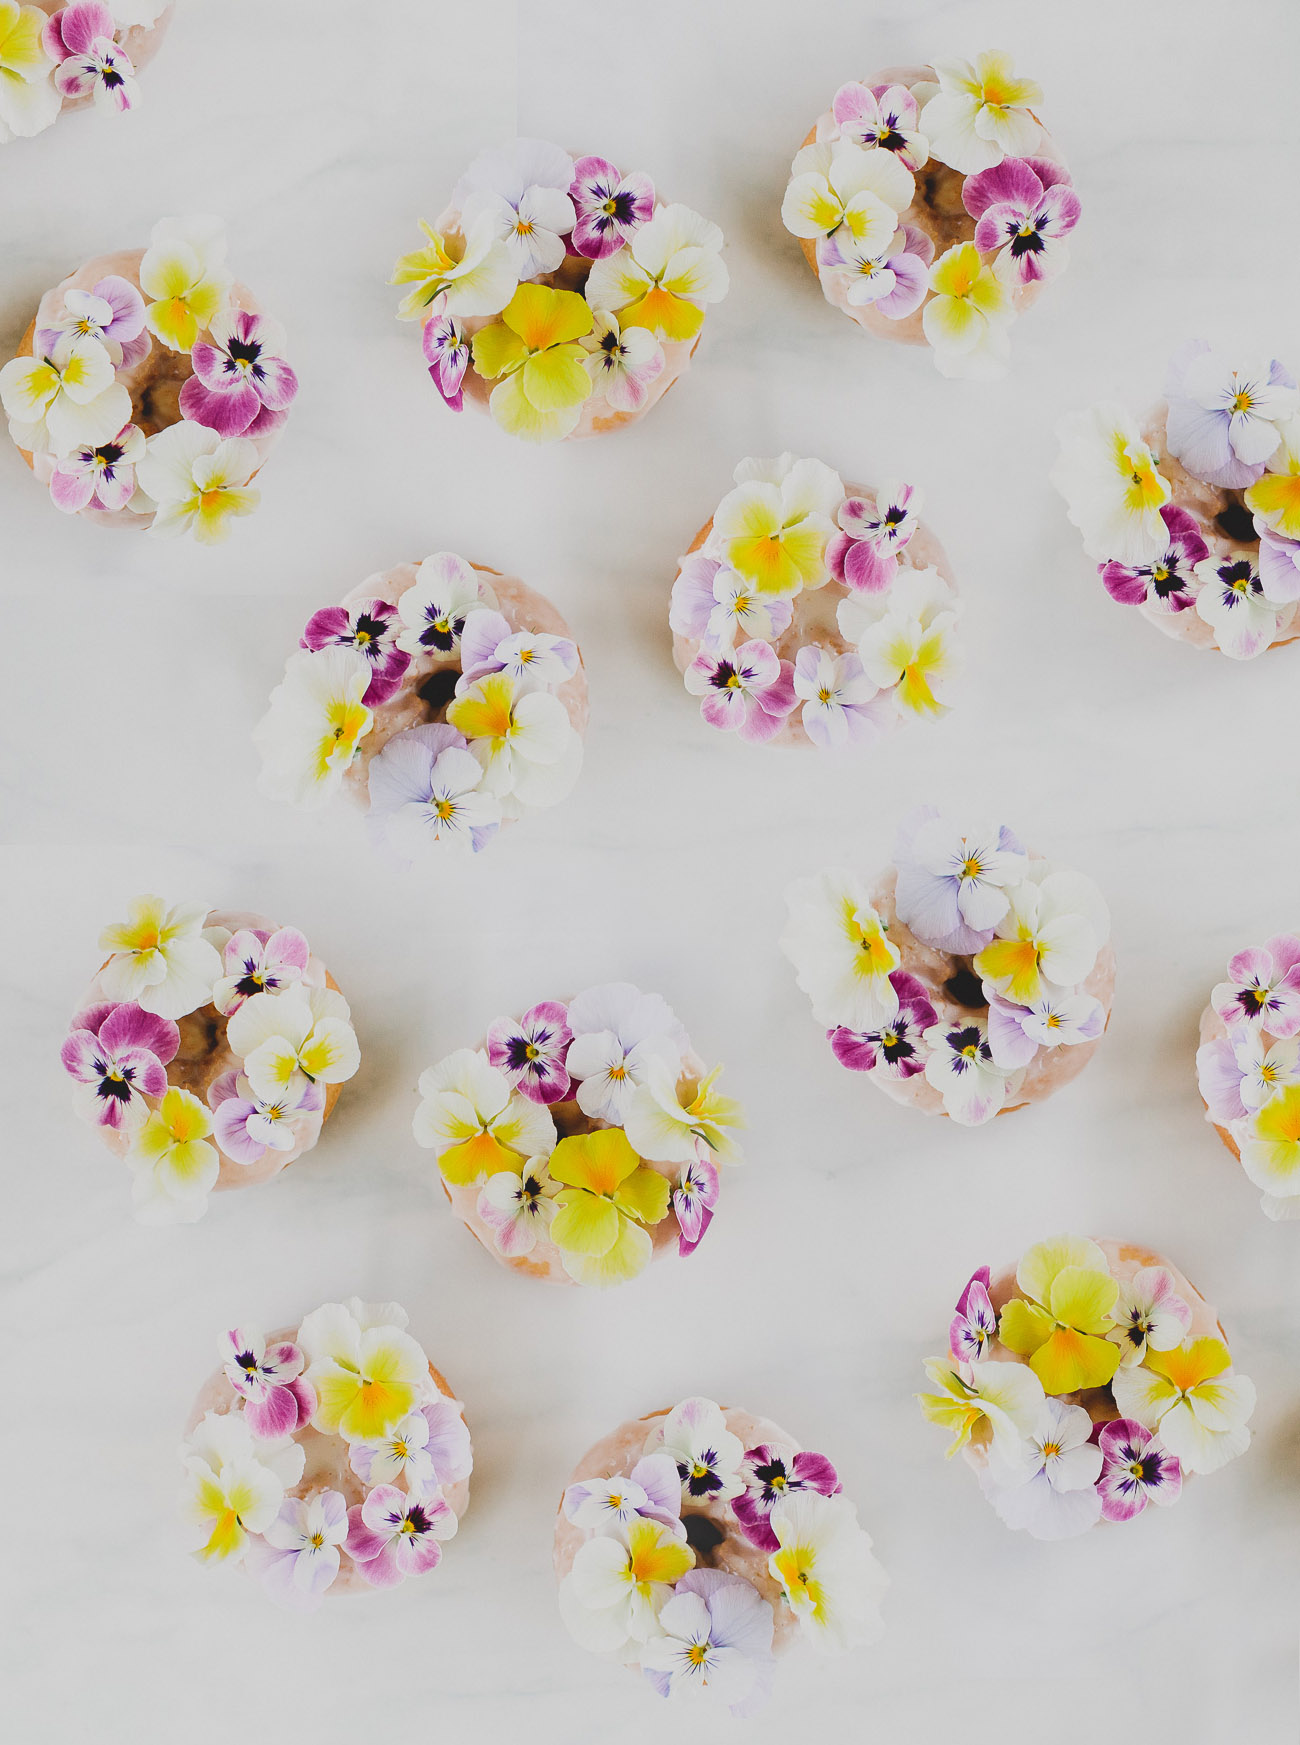 donuts with edible flowers